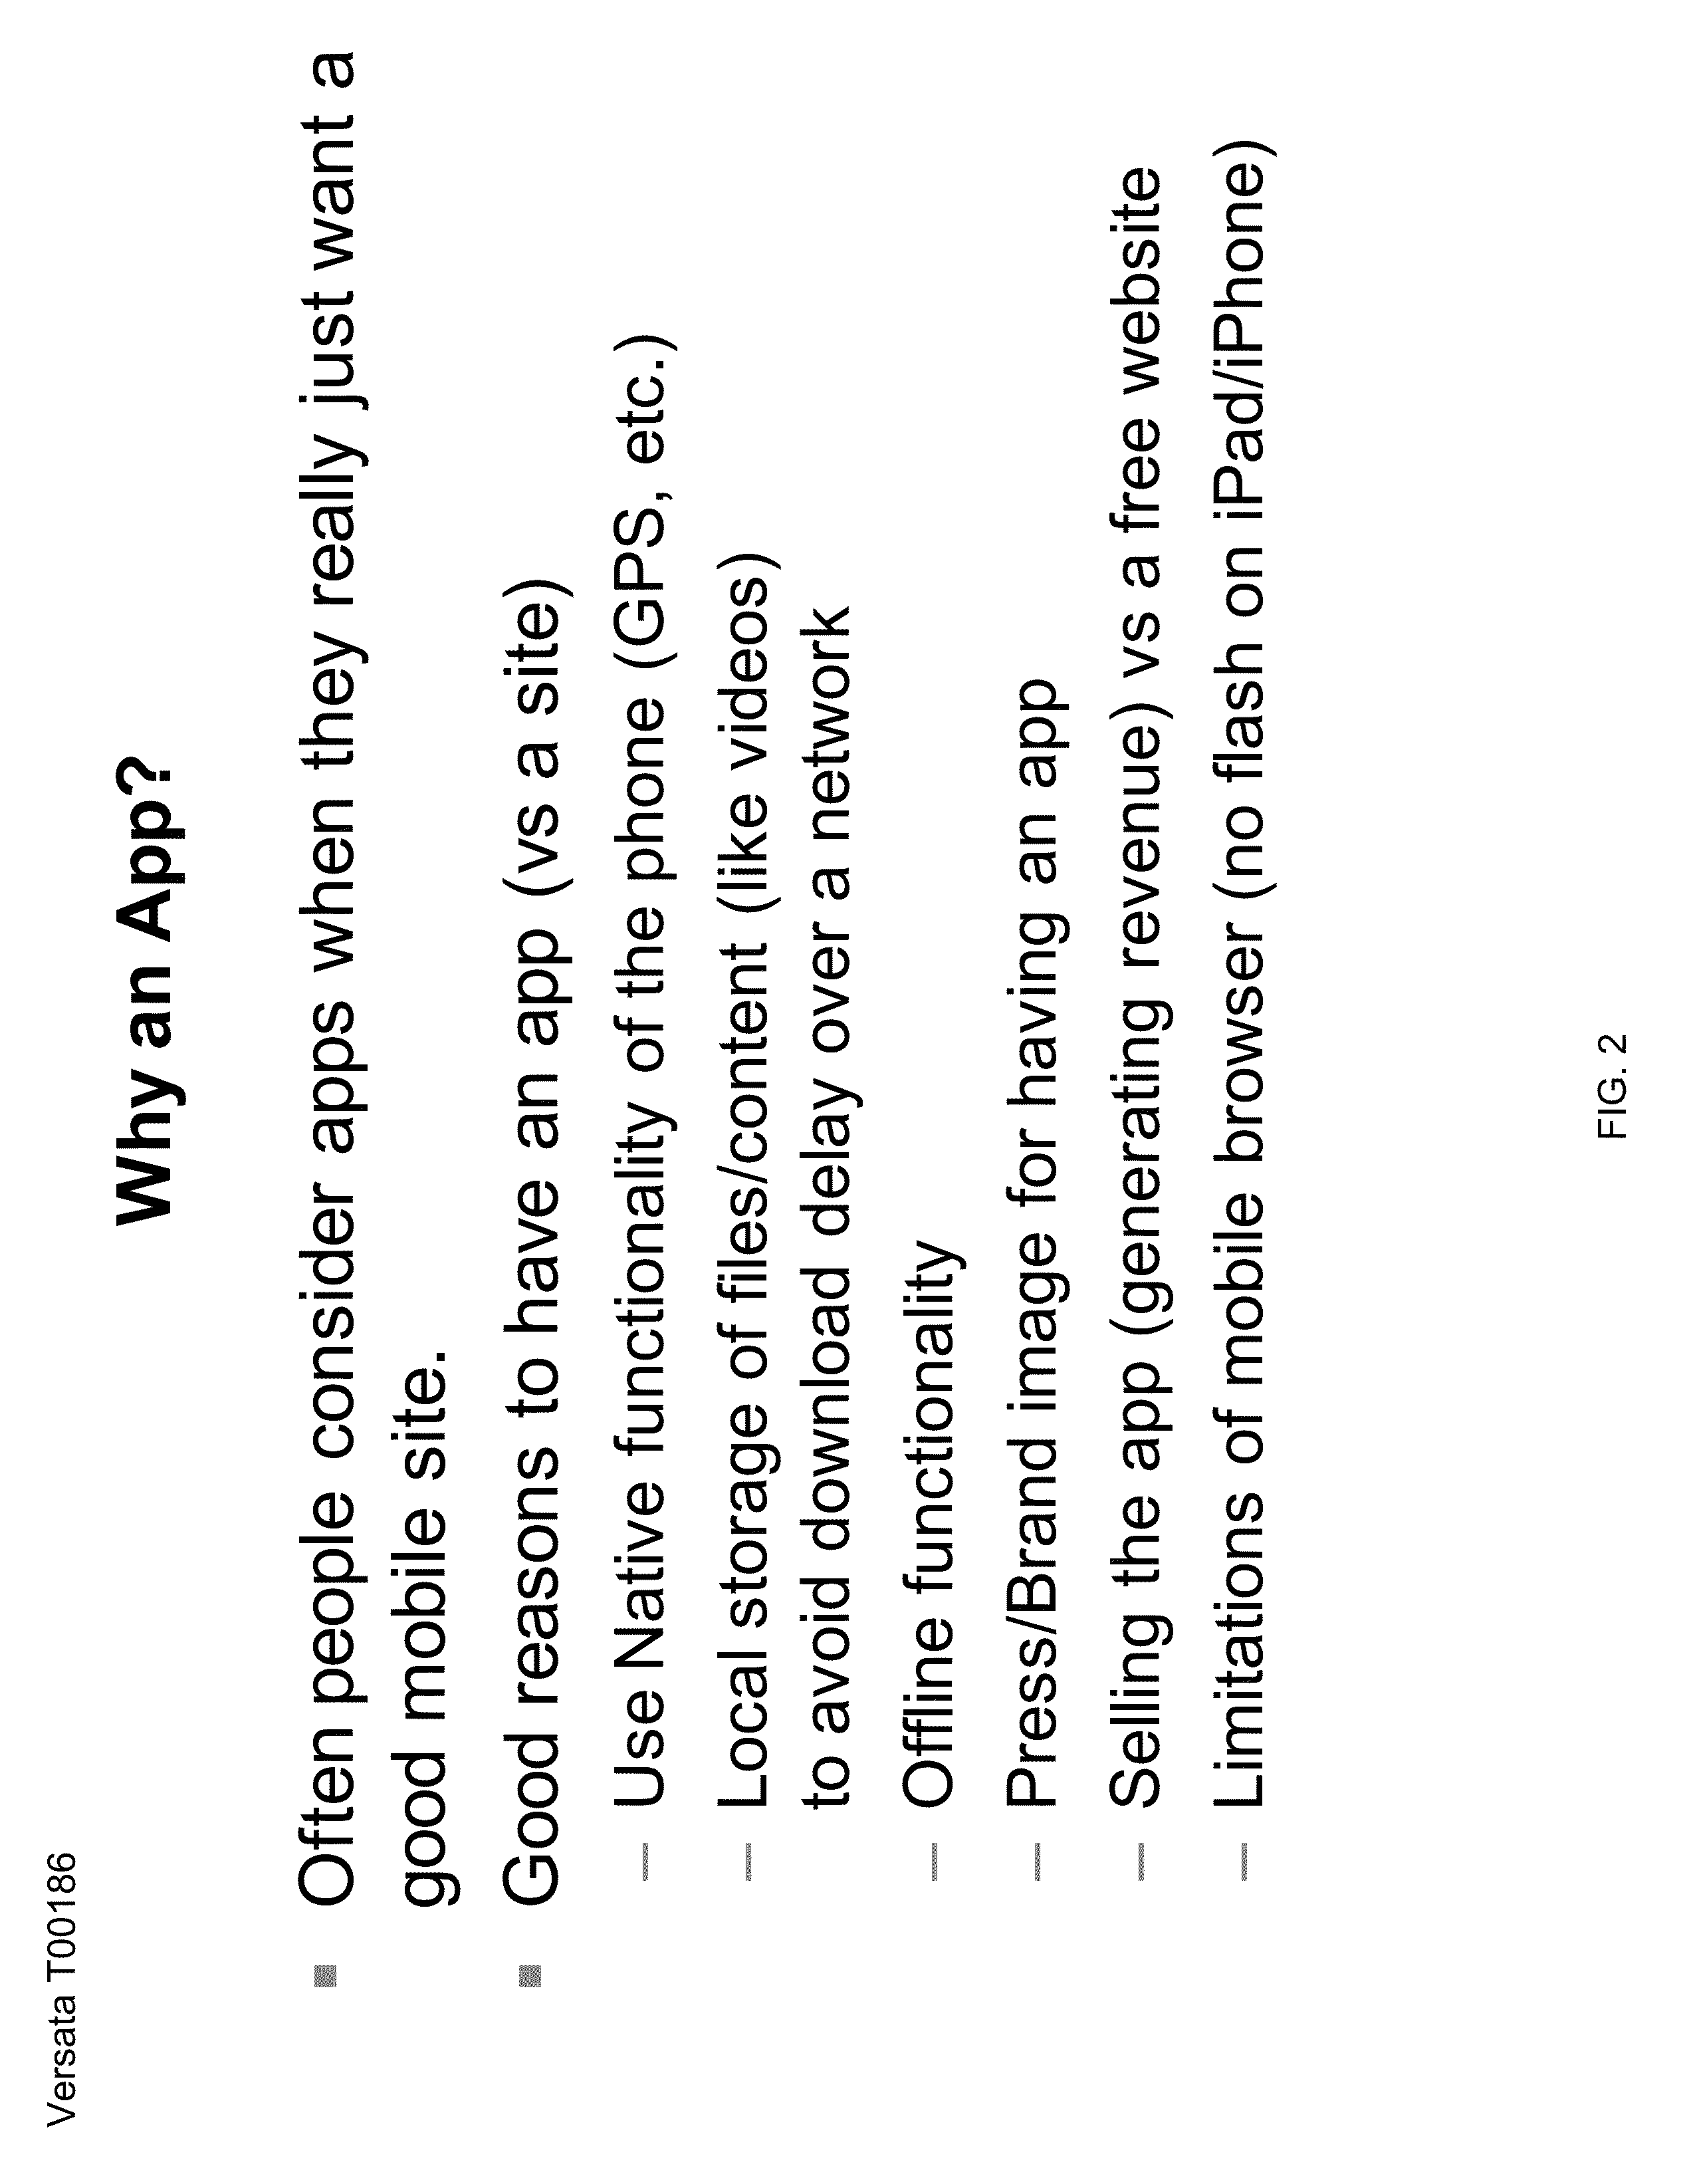 Virtual salesperson system and method